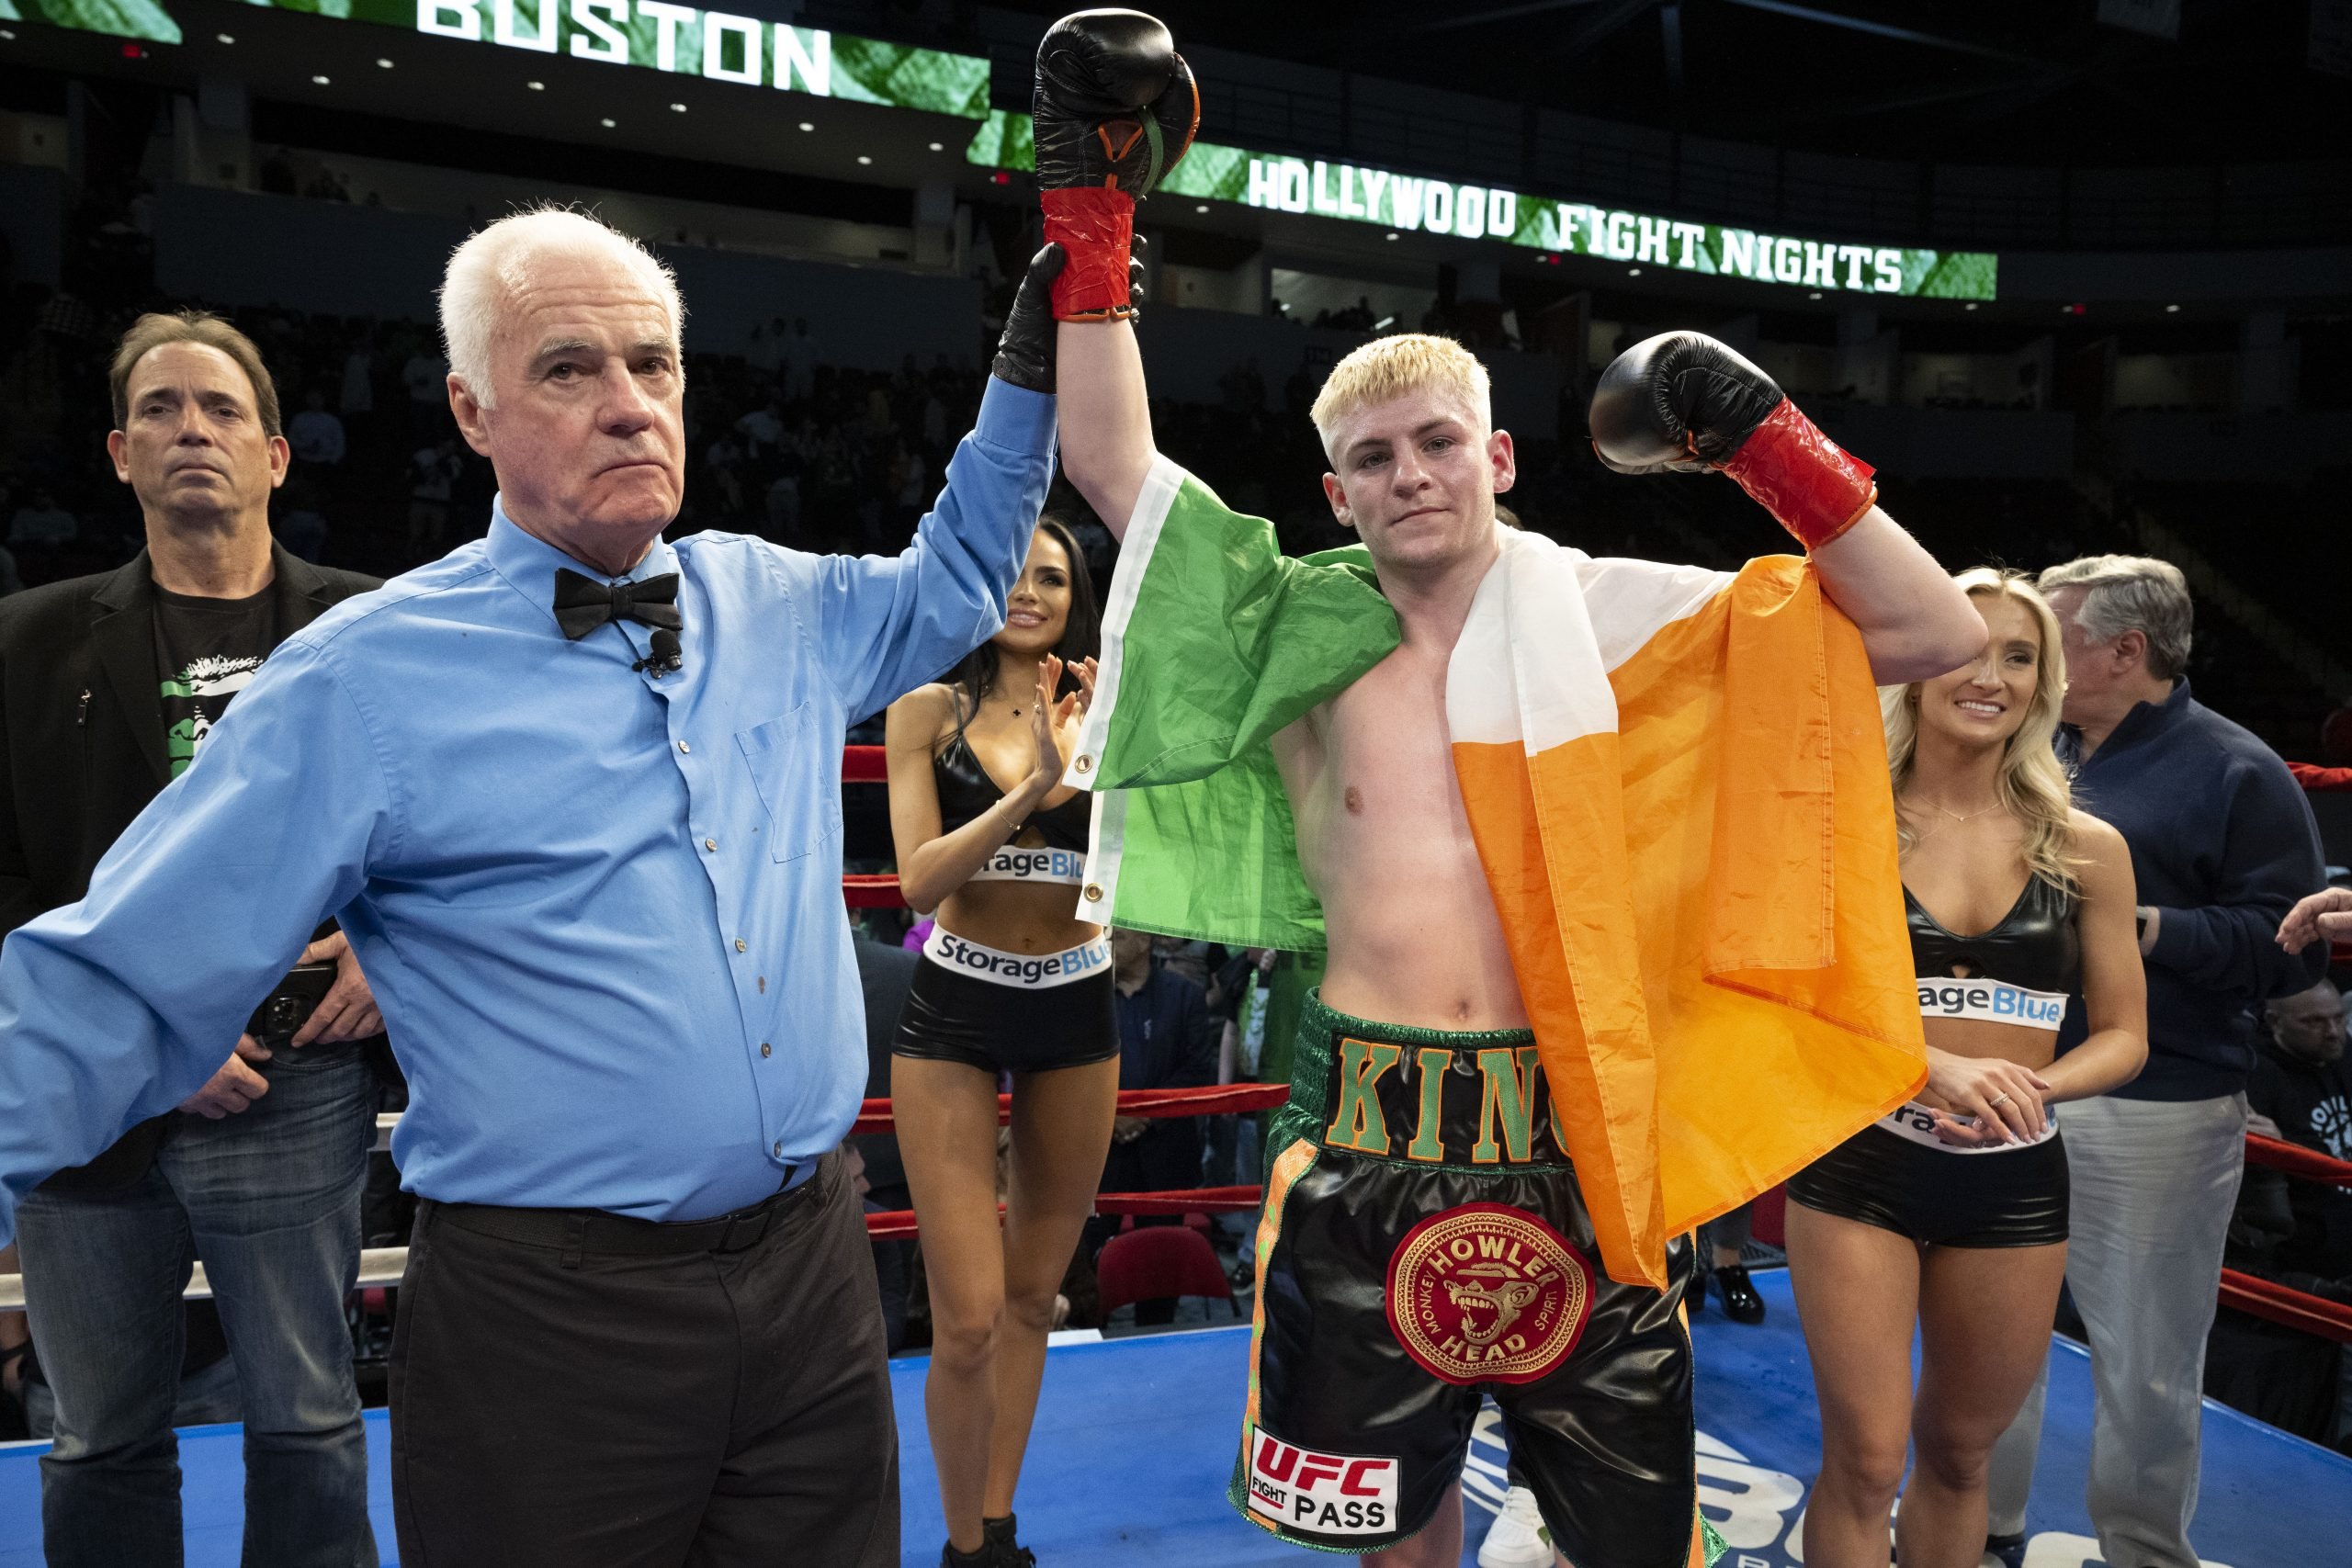 Callum Walsh aims to put his career in high gear starting with Carson Jones on Friday